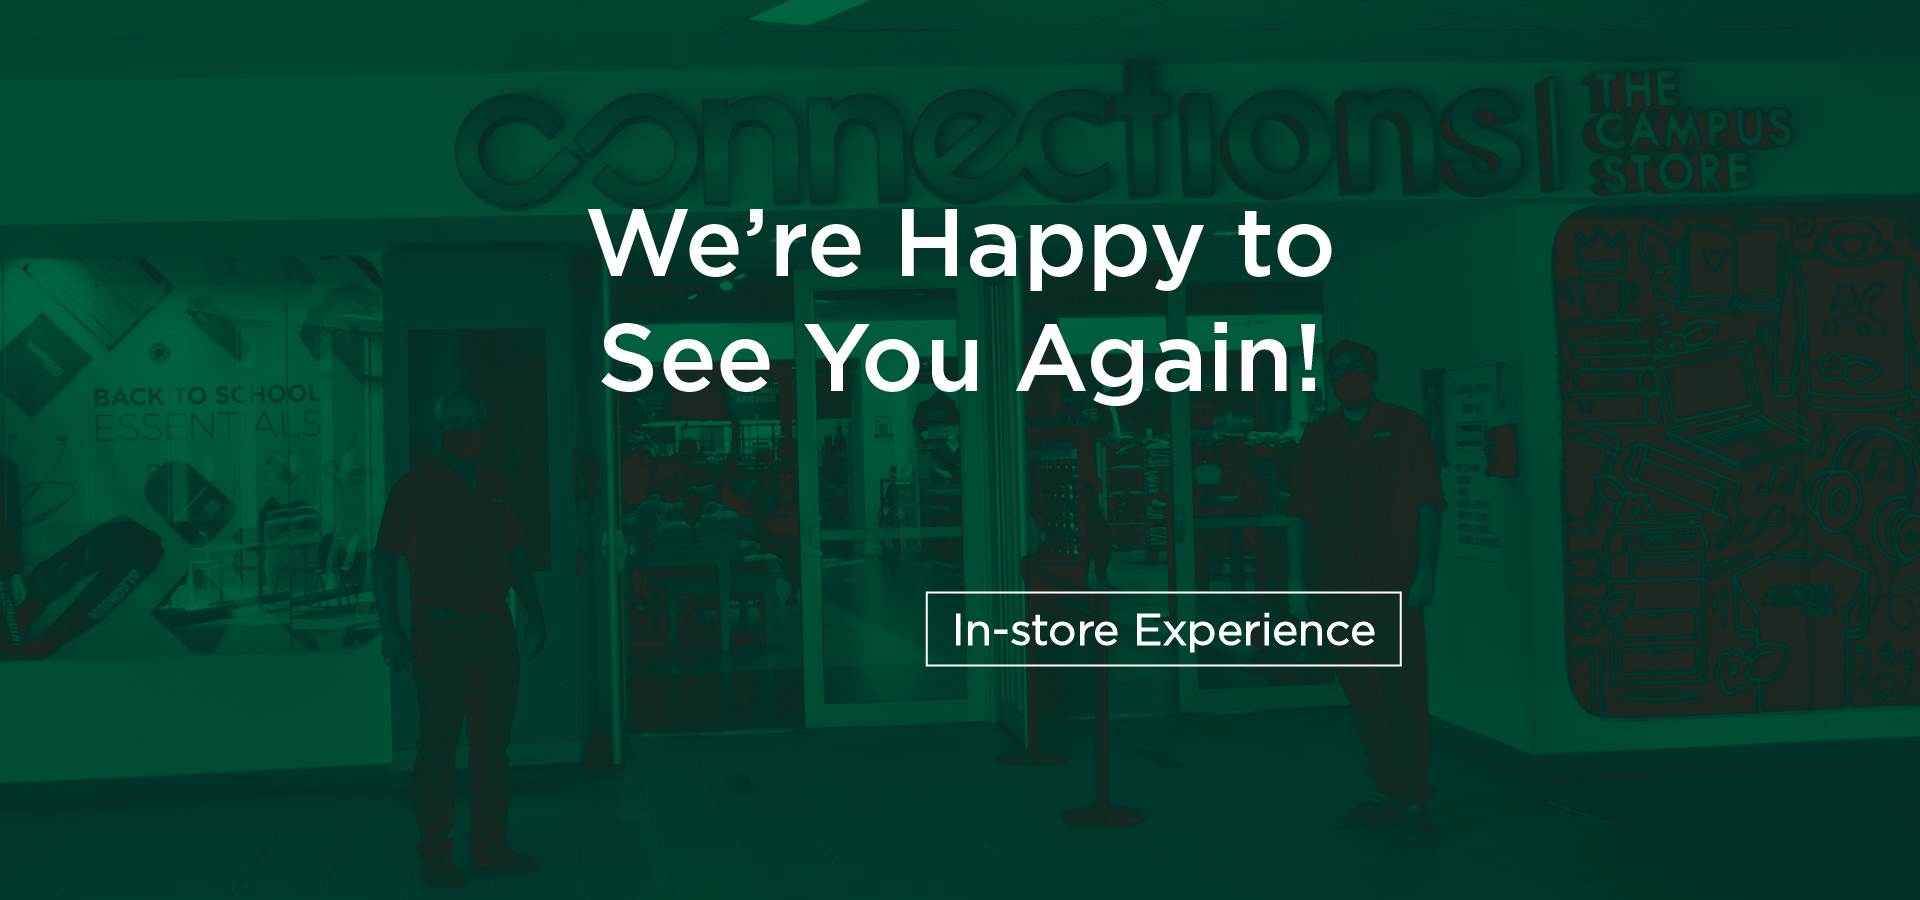 We're happy to see you! In-store experience ->